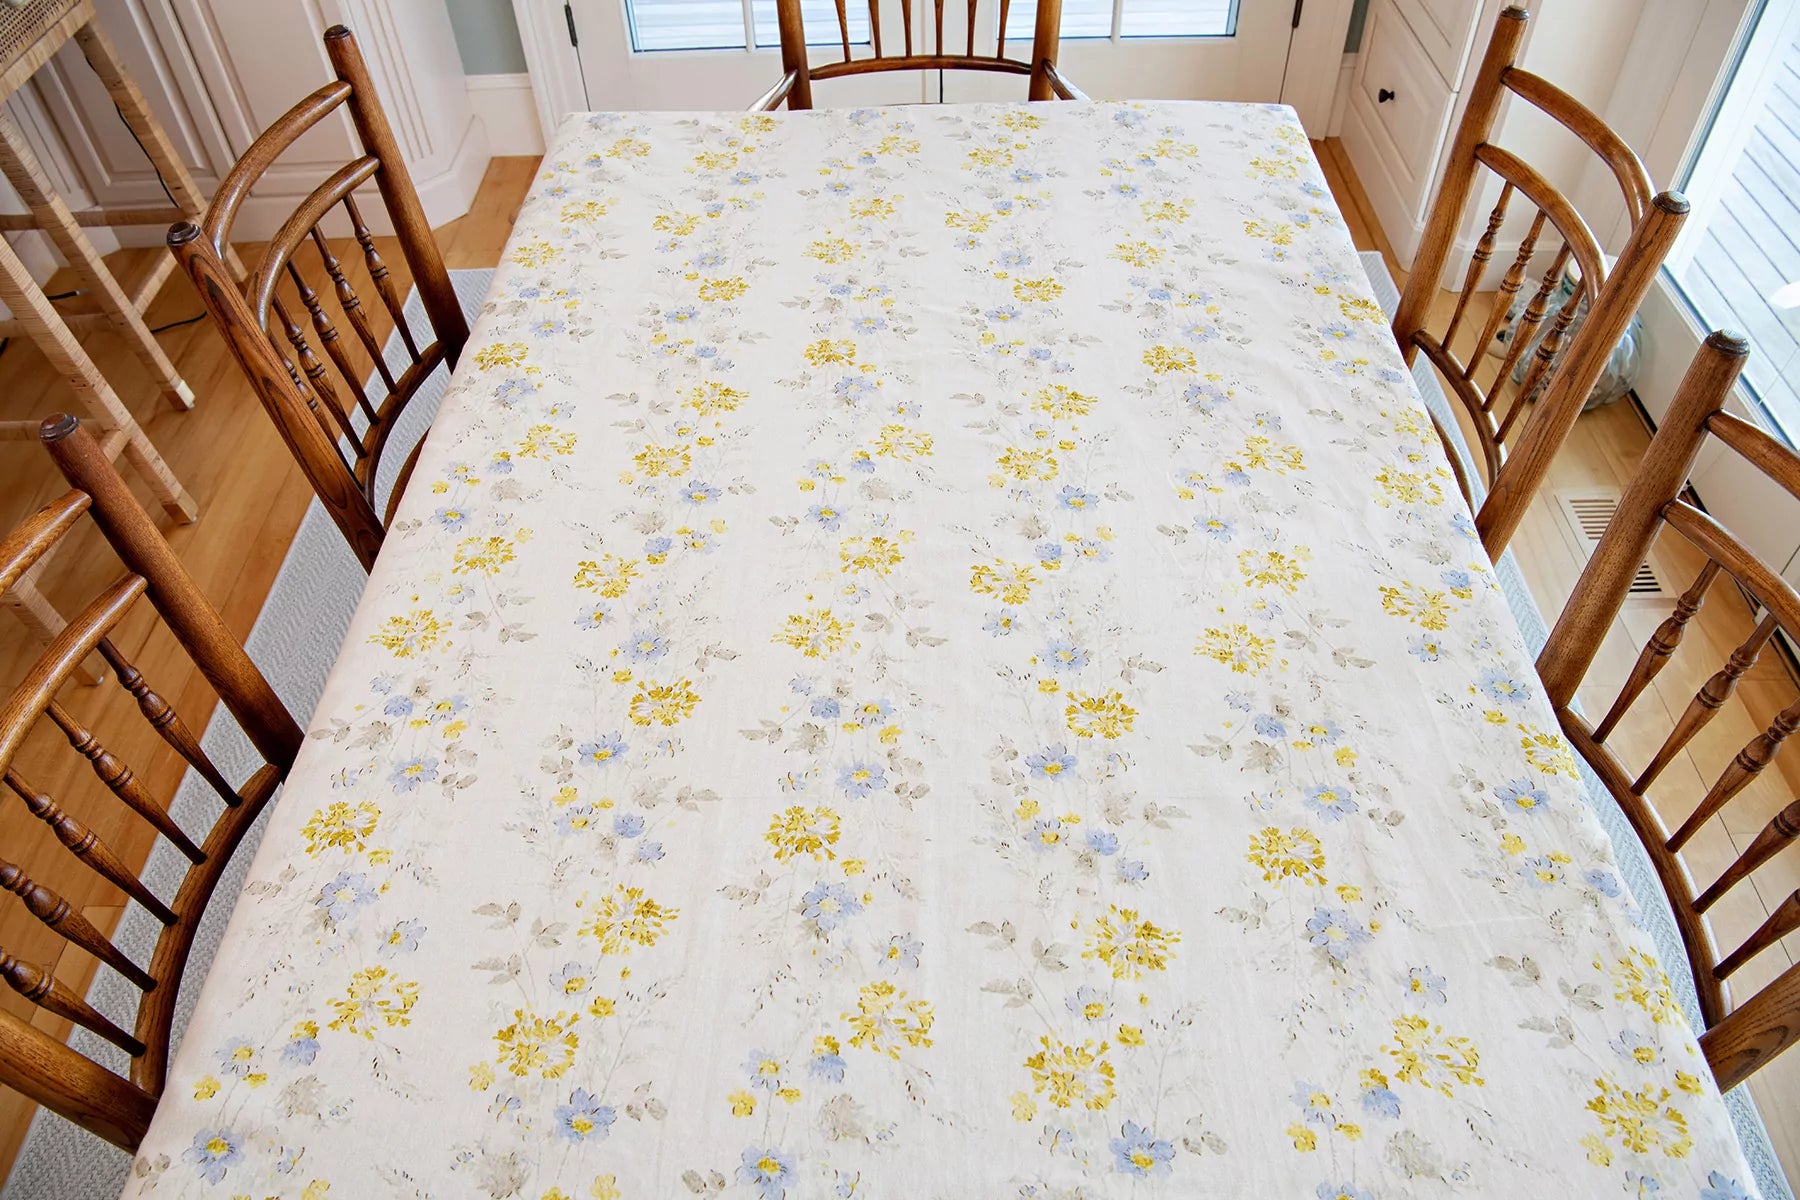 Prairie Flower Tablecloth /, 100% Cotton, Size 60x90 | April Cornell | Square Tablecloths for Tablescaping